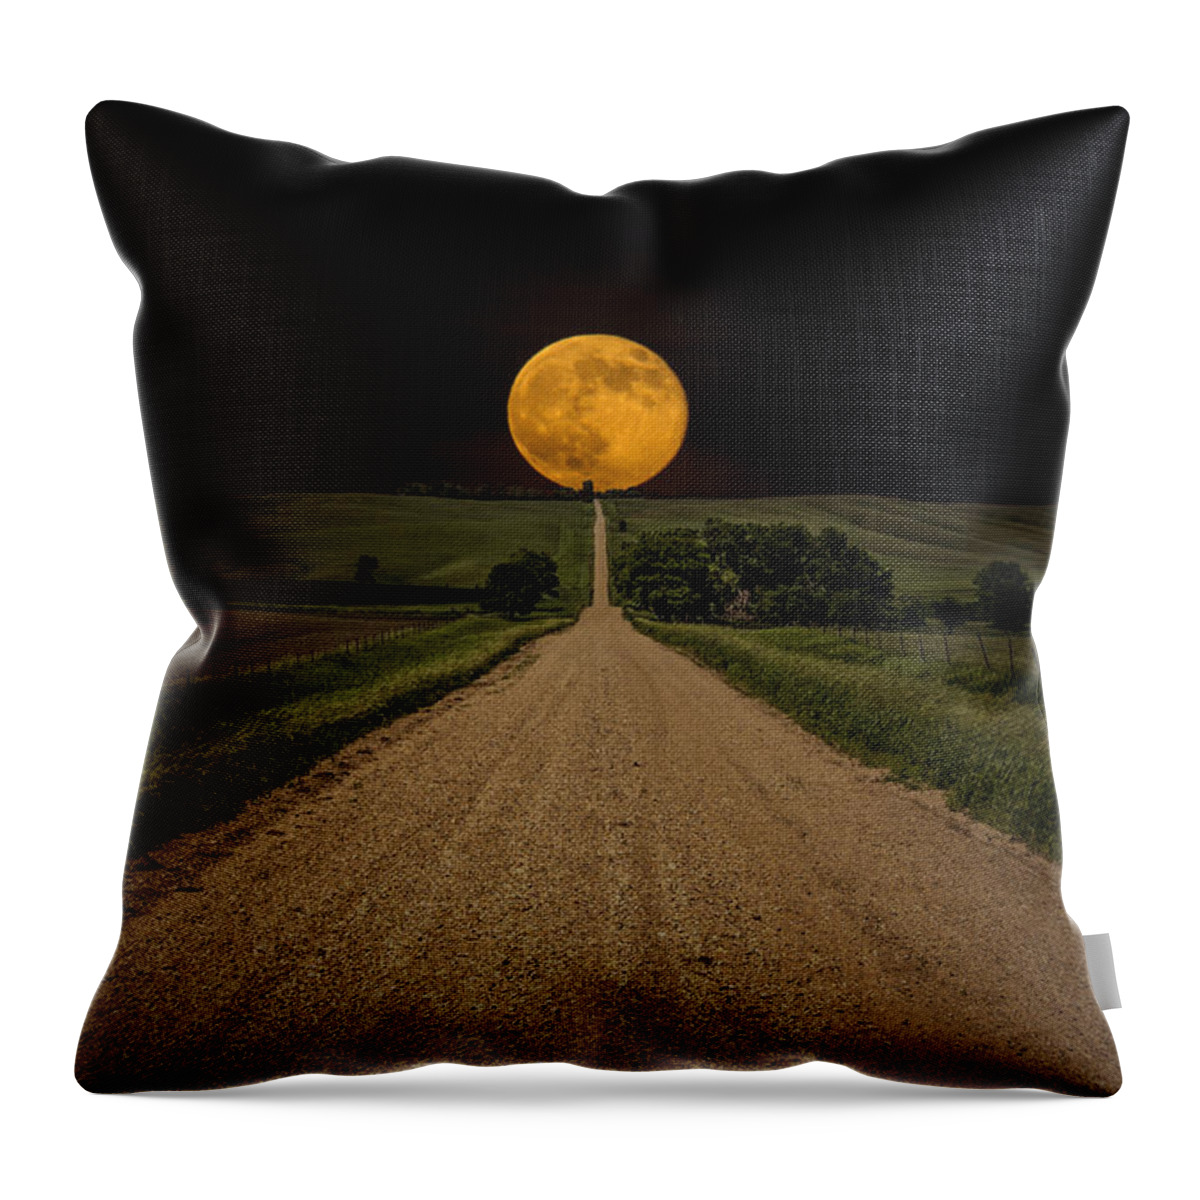 #faatoppicks Throw Pillow featuring the photograph Road to Nowhere - Supermoon by Aaron J Groen